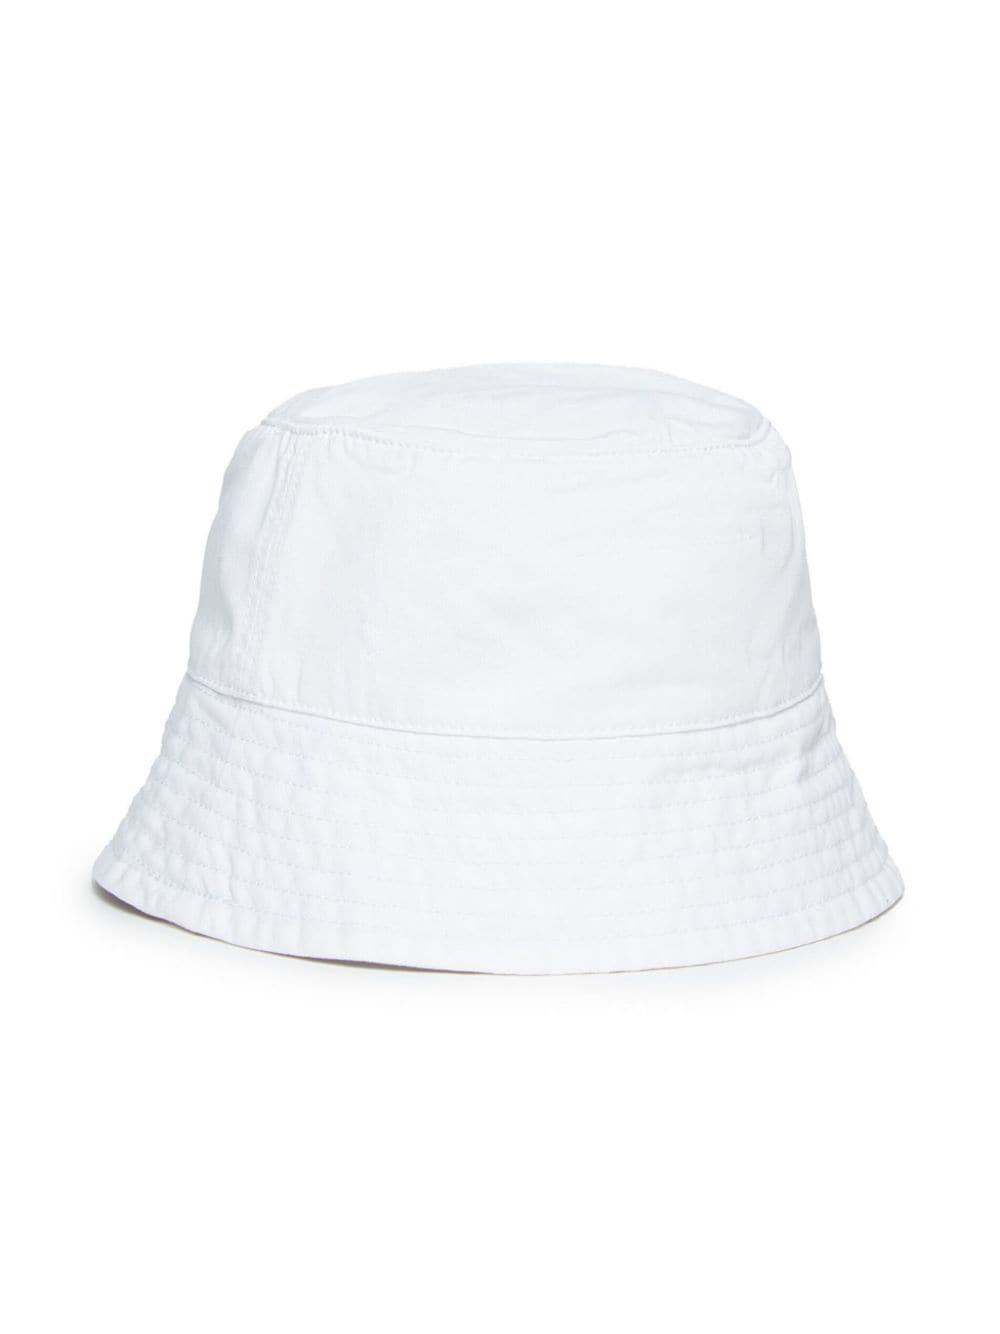 White hat for girls with logo